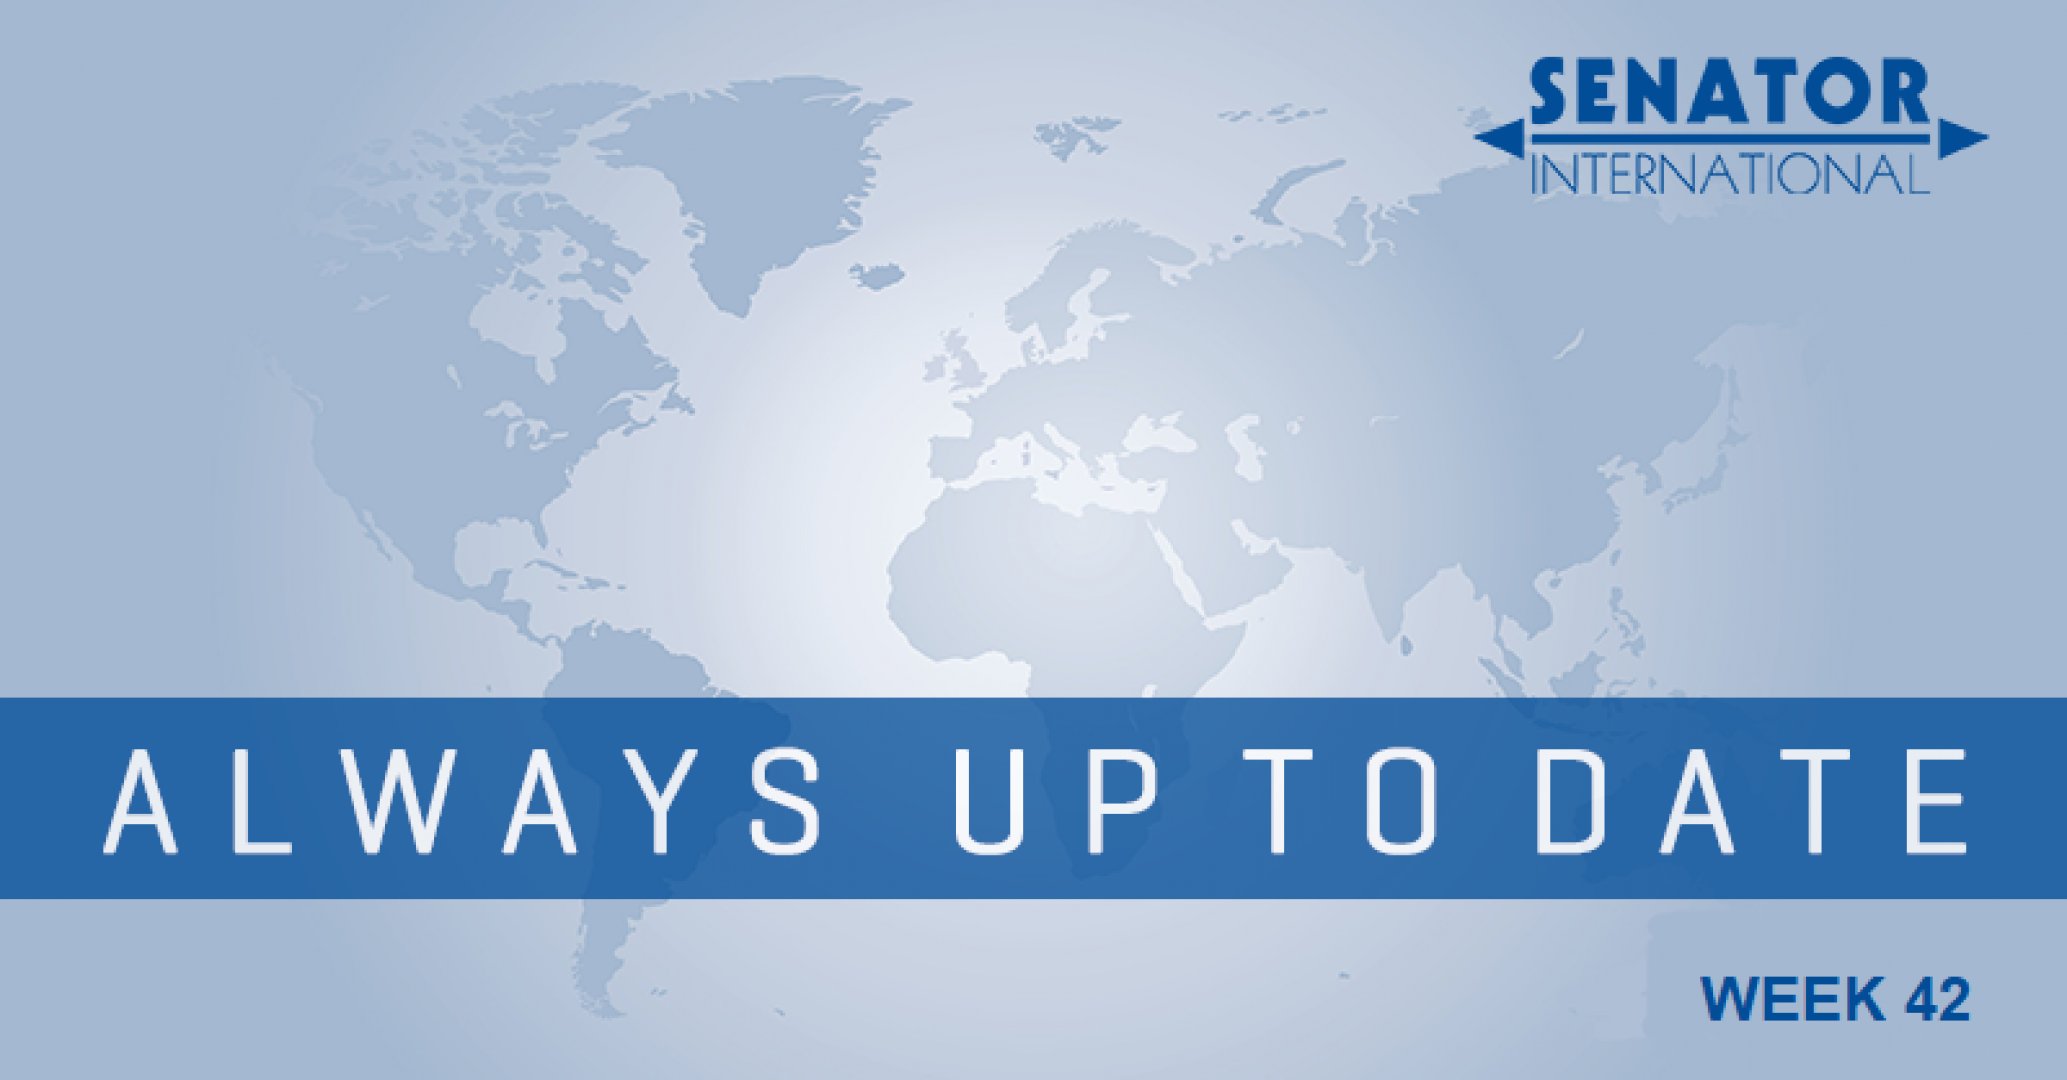 Stay UP TO DATE with SENATOR INTERNATIONAL!